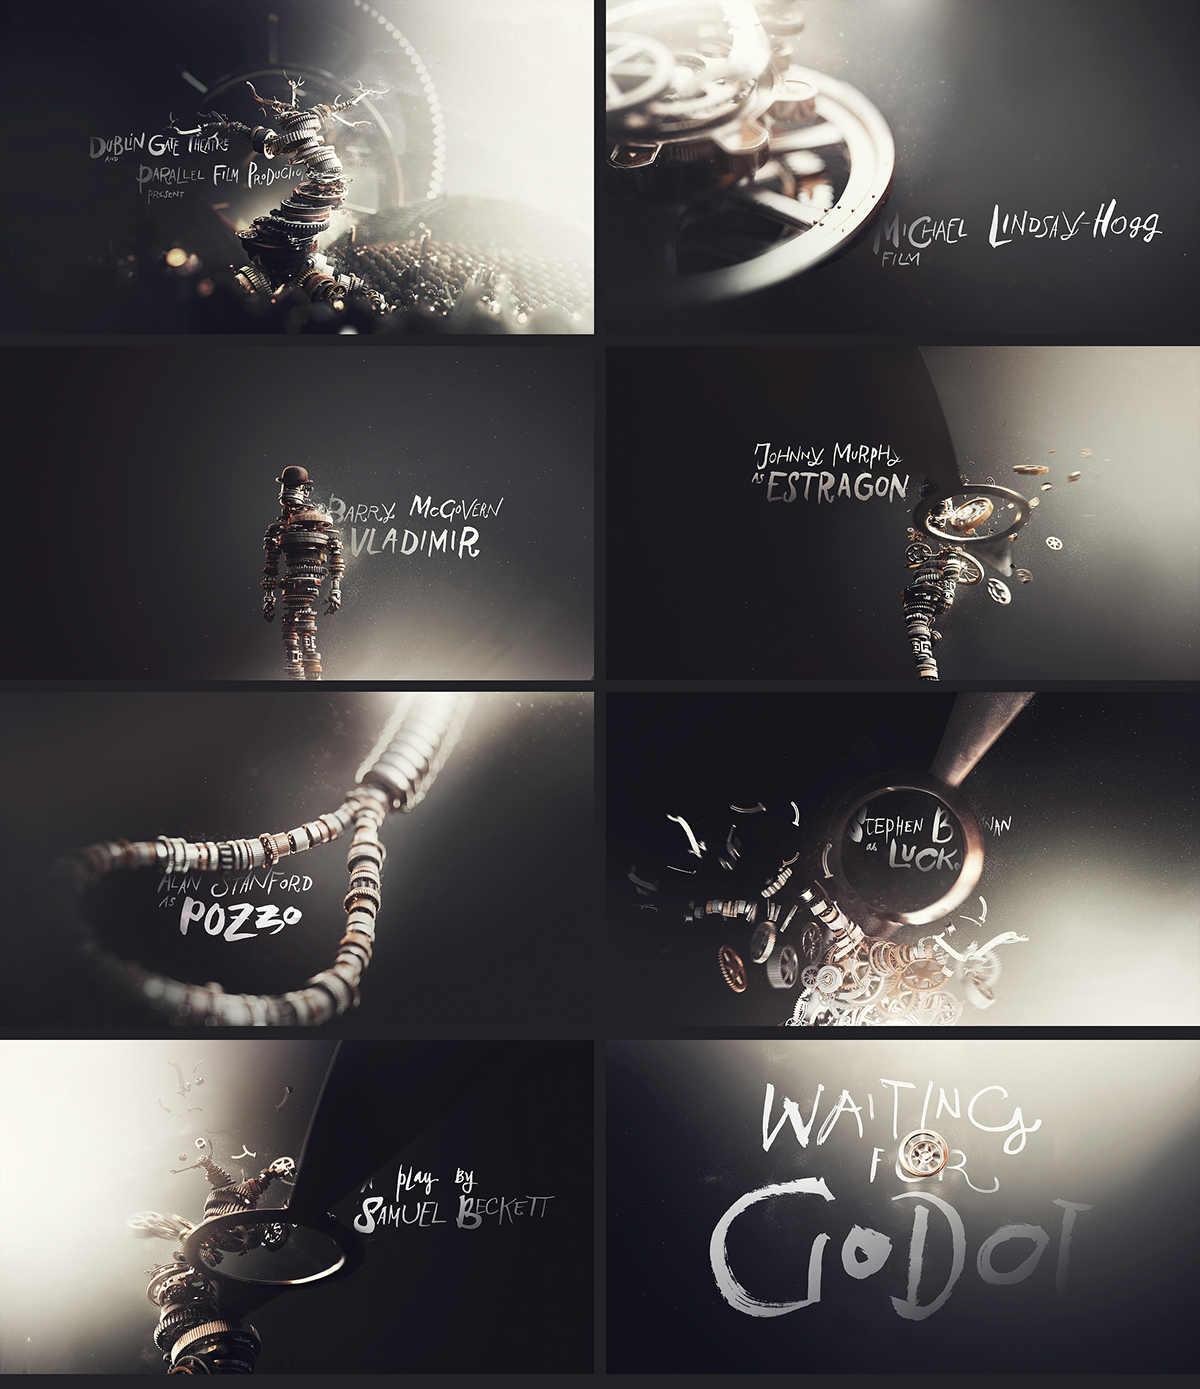 title sequence titles beckett waiting for godot